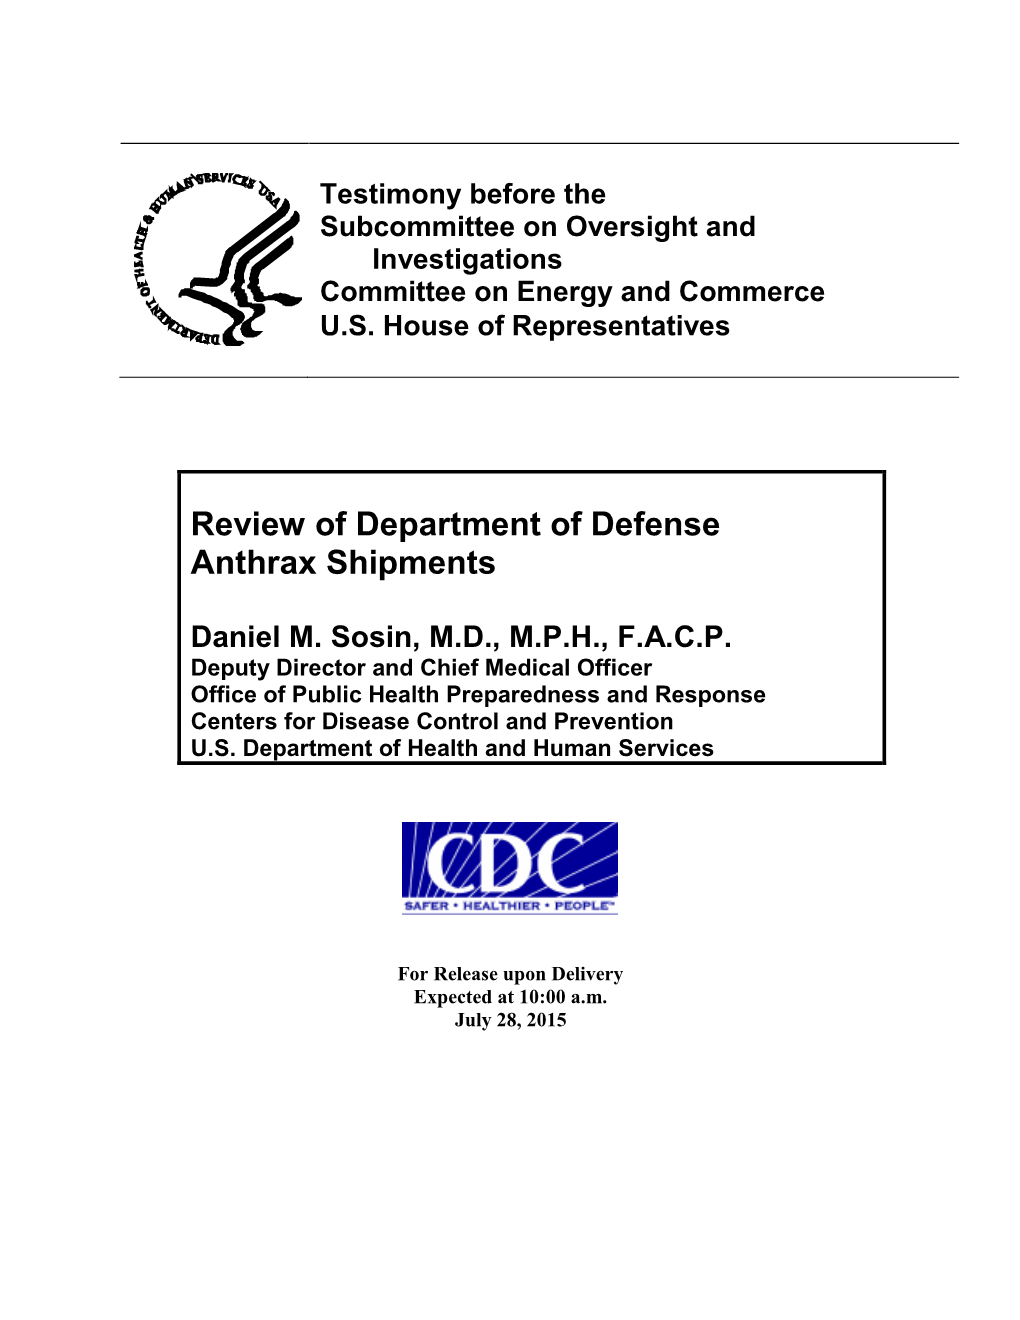 Review of Department of Defense Anthrax Shipments